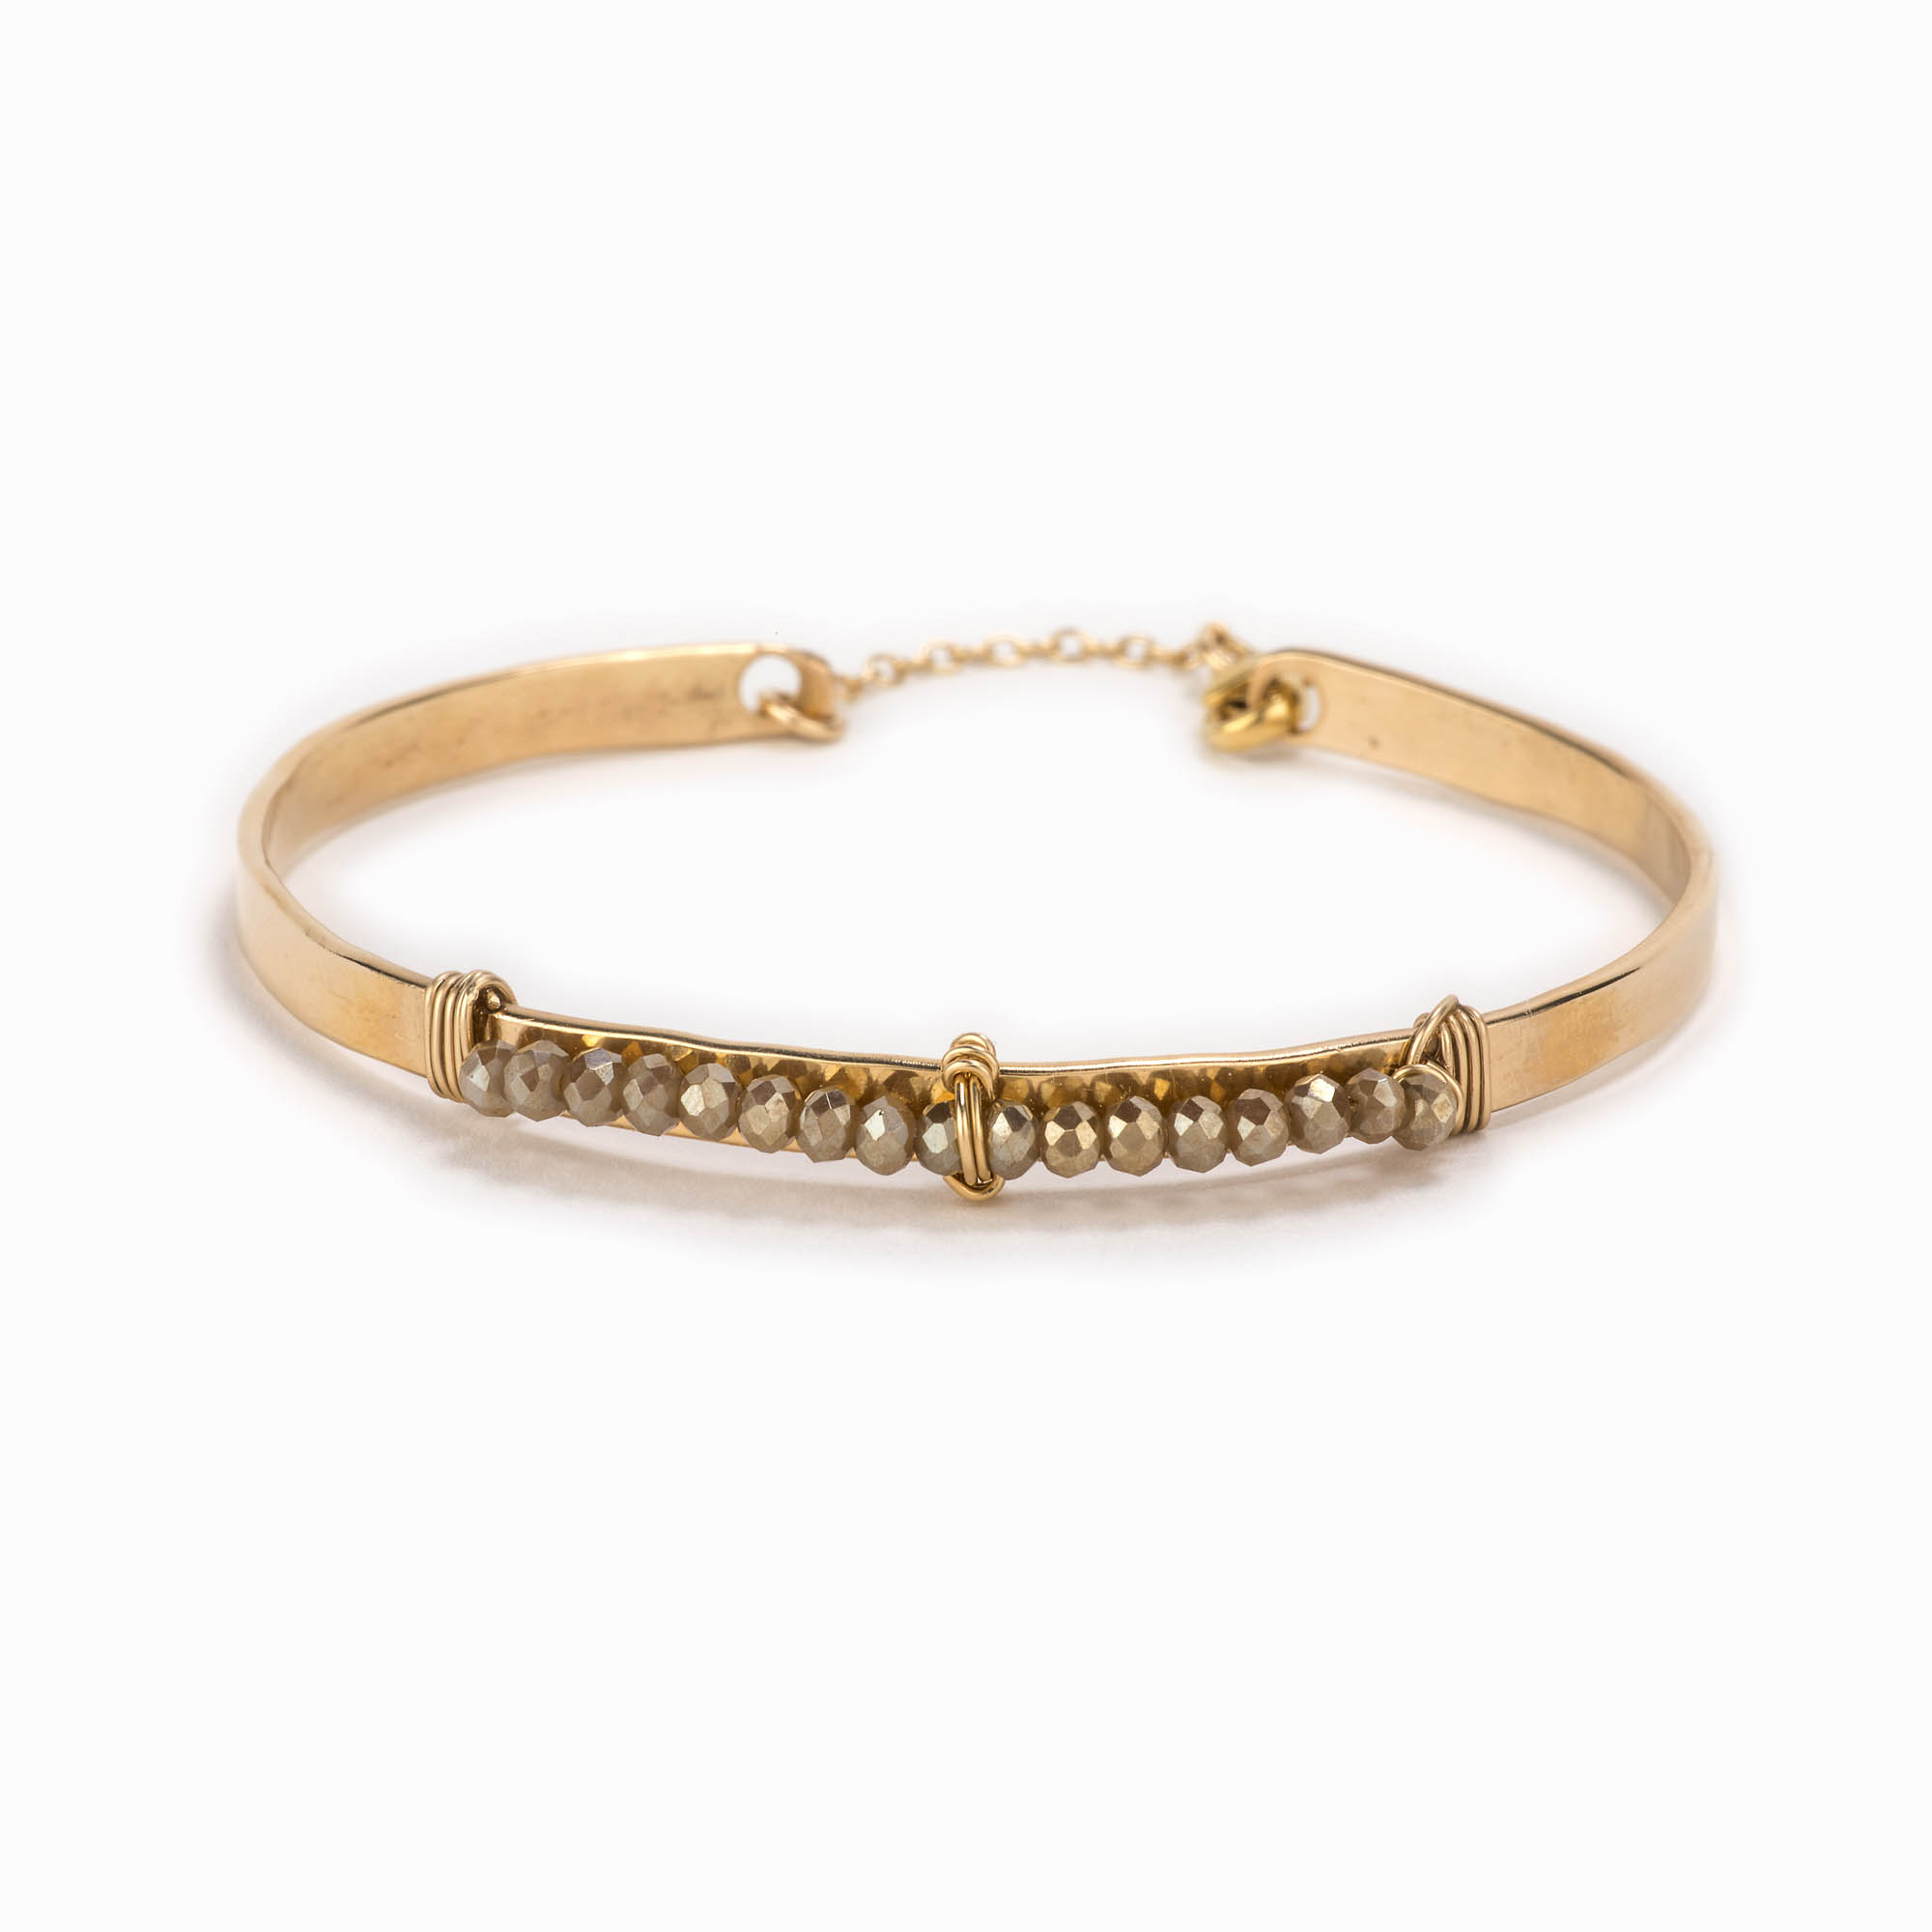 Featured image for “Ramos Gold Bracelet”